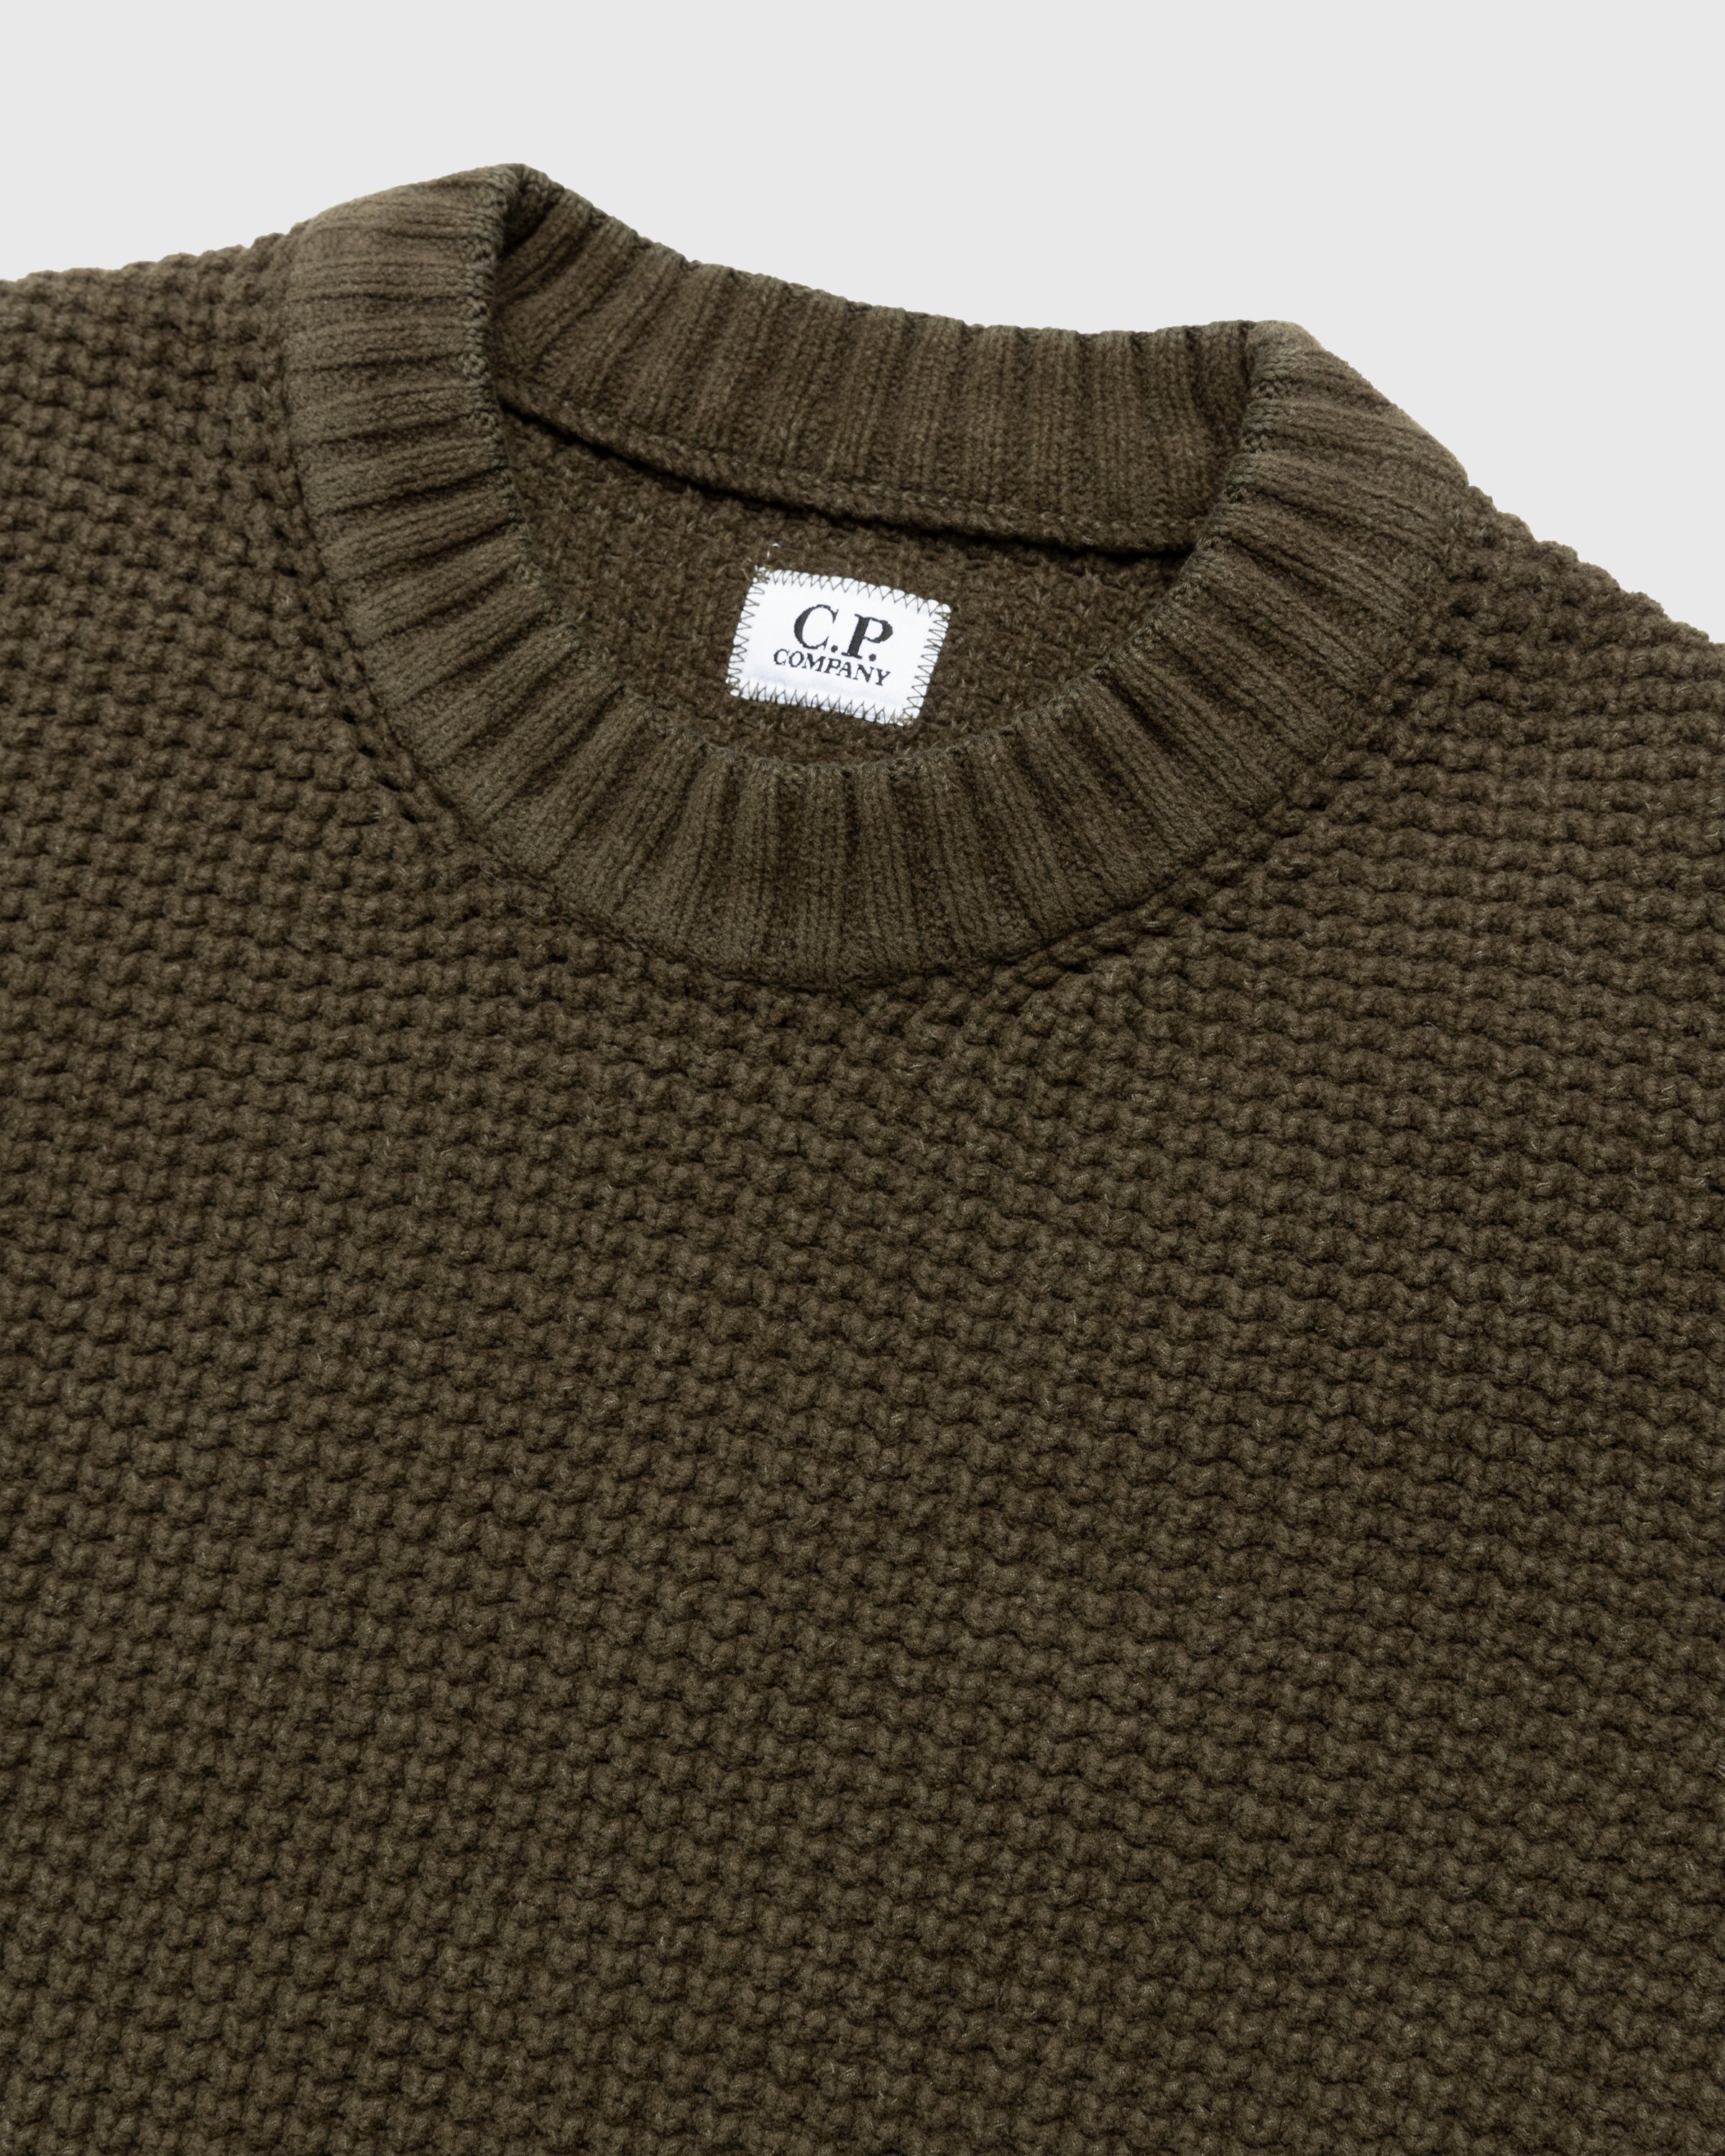 C.P. Company - Chenille Cotton Jumper Green - Clothing - Green - Image 3